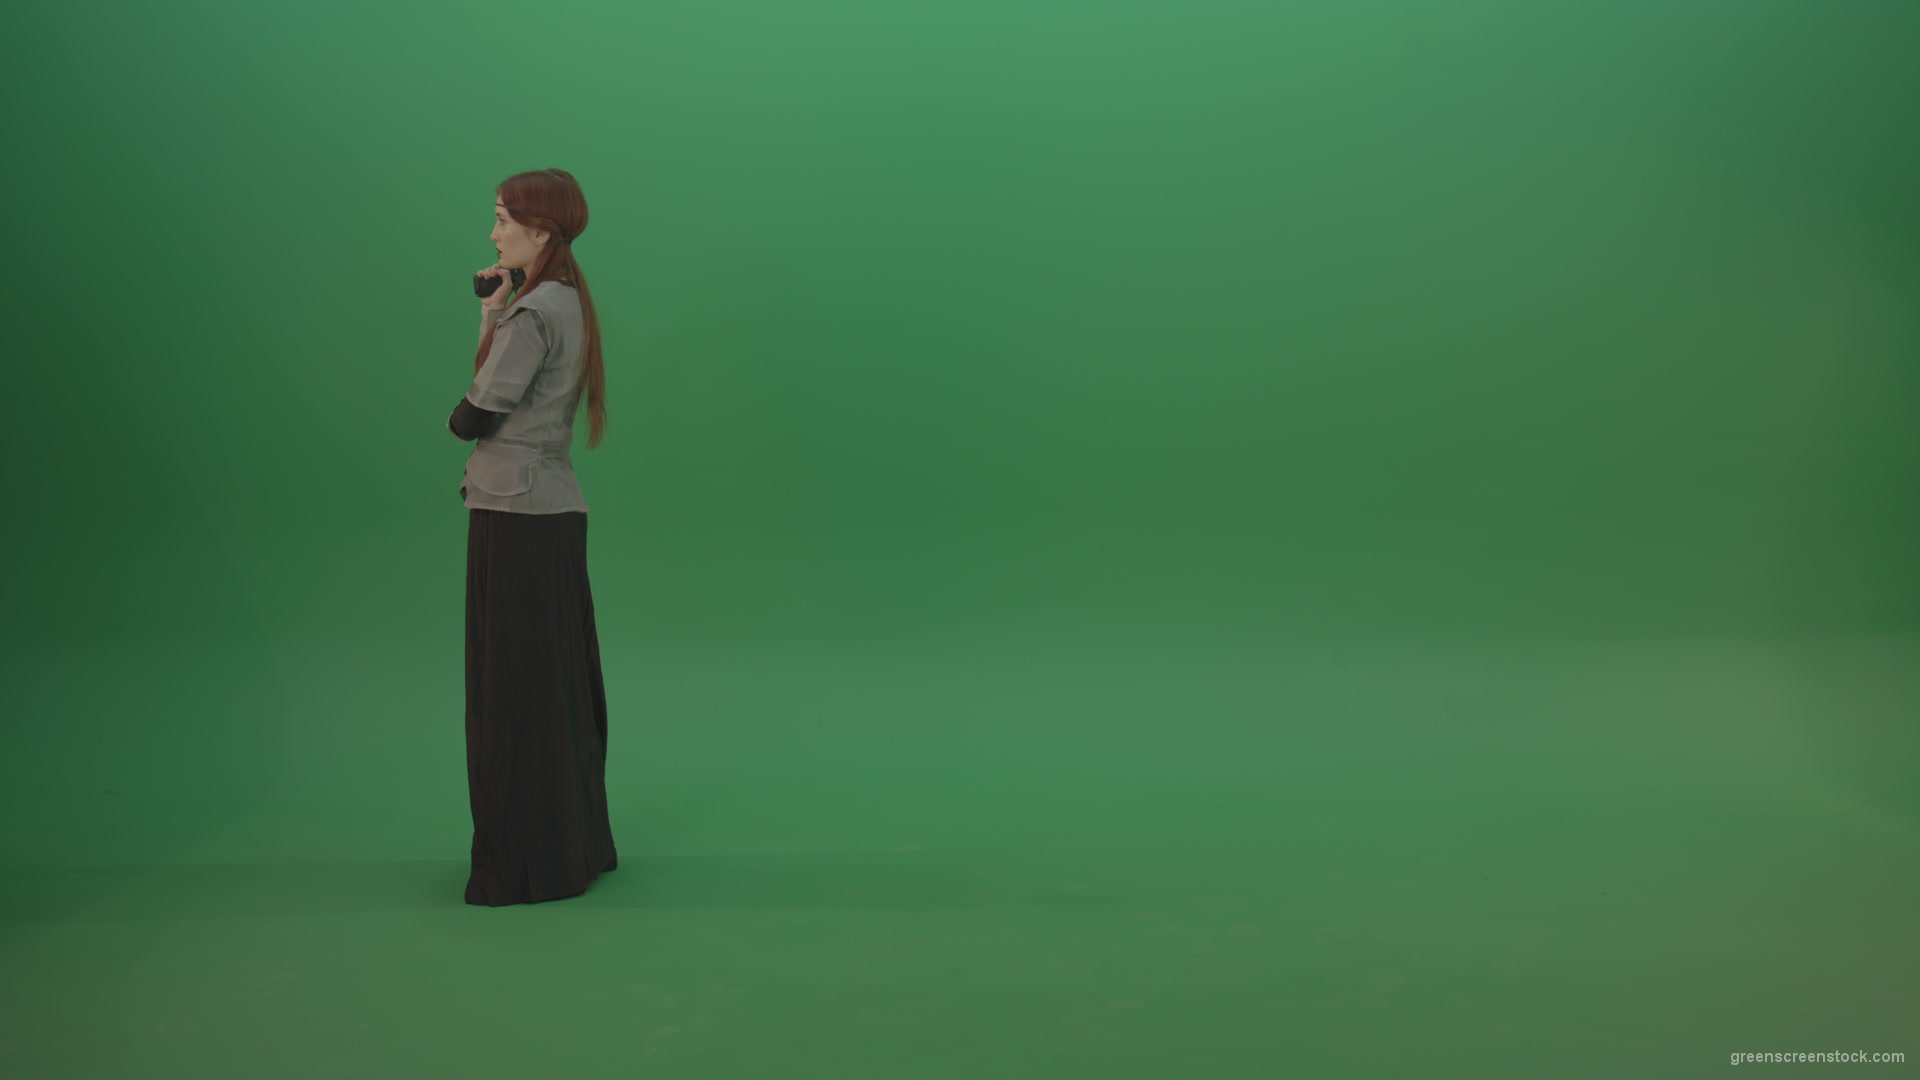 Girl-dressed-in-an-ancient-costume-holds-a-gun-in-her-hands-walks-and-shoots_001 Green Screen Stock